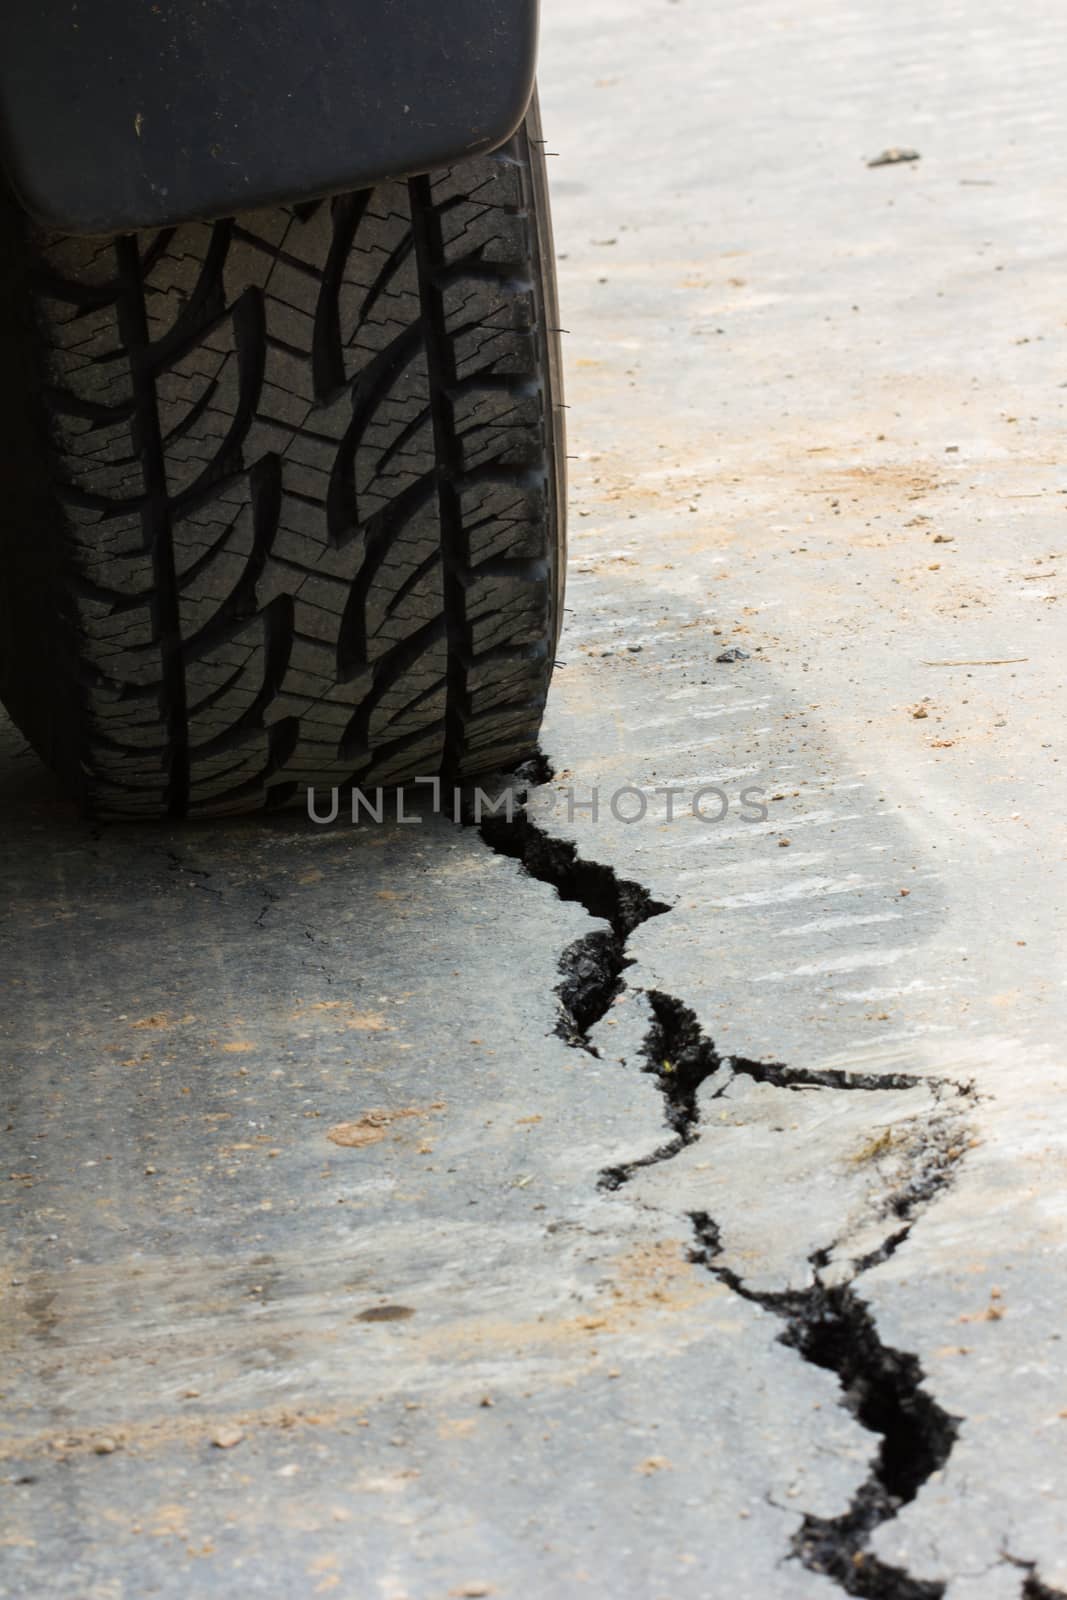 back view of tire tread and cracked asphalt